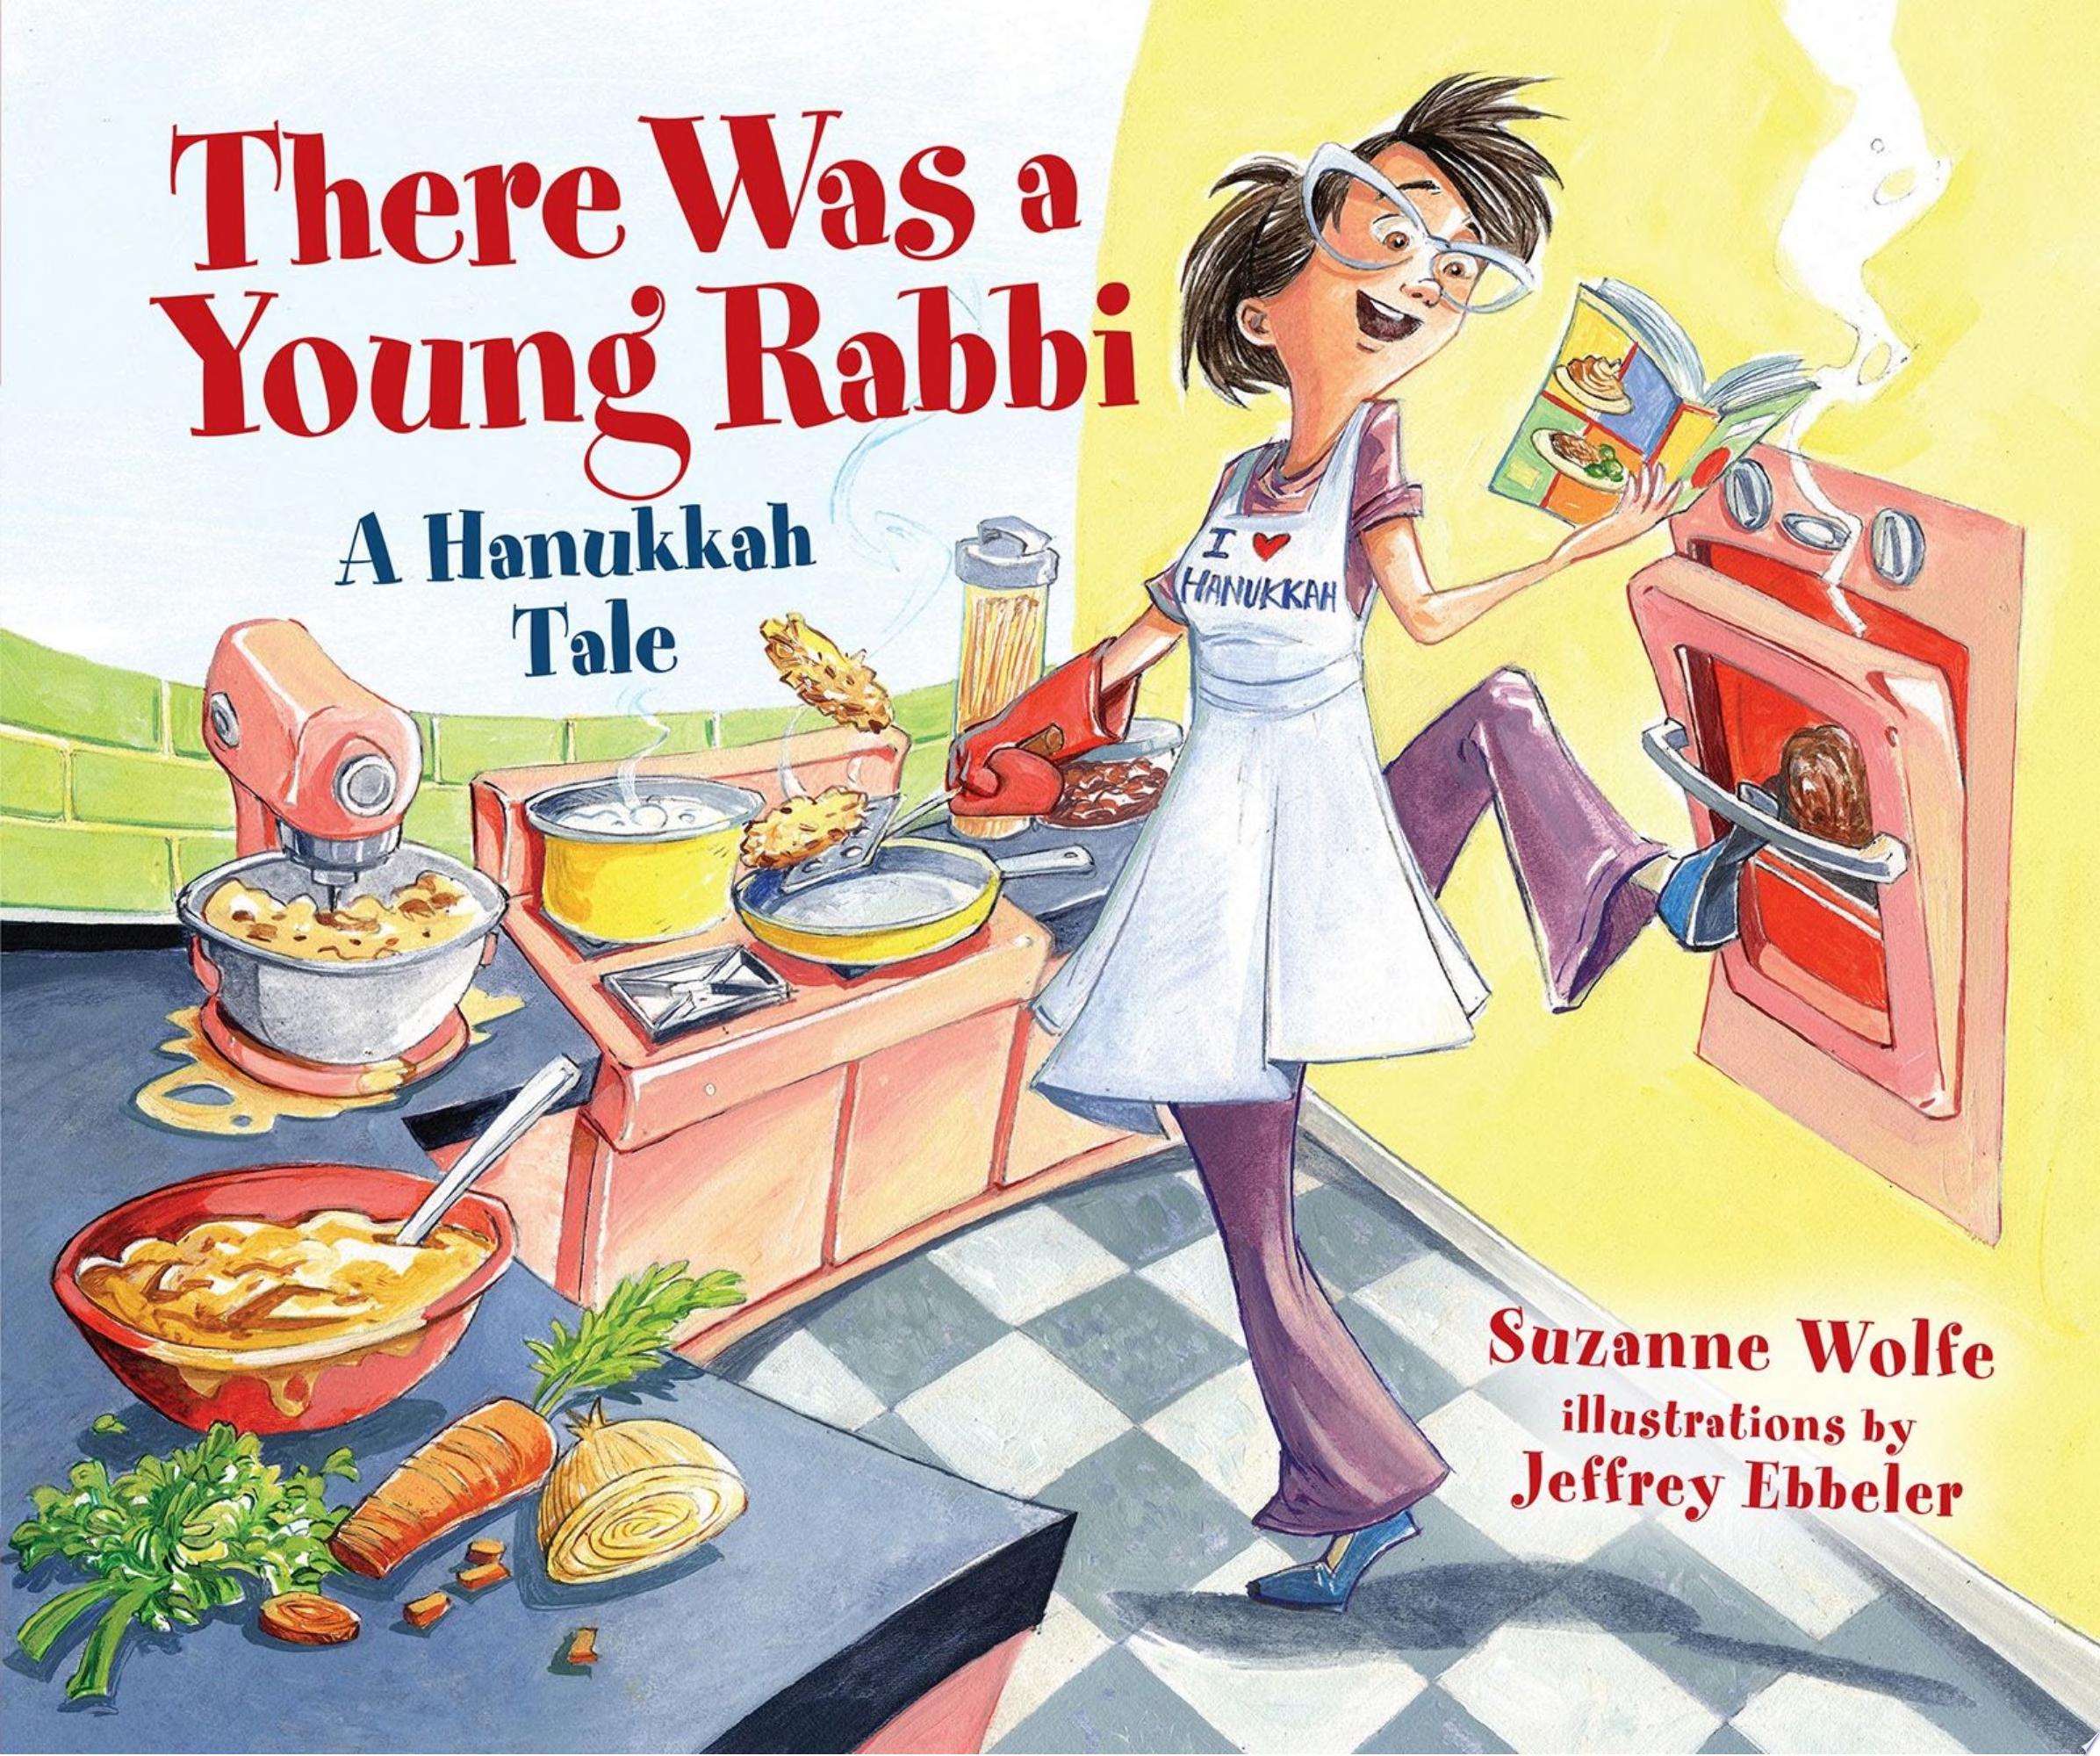 Image for "There Was a Young Rabbi"